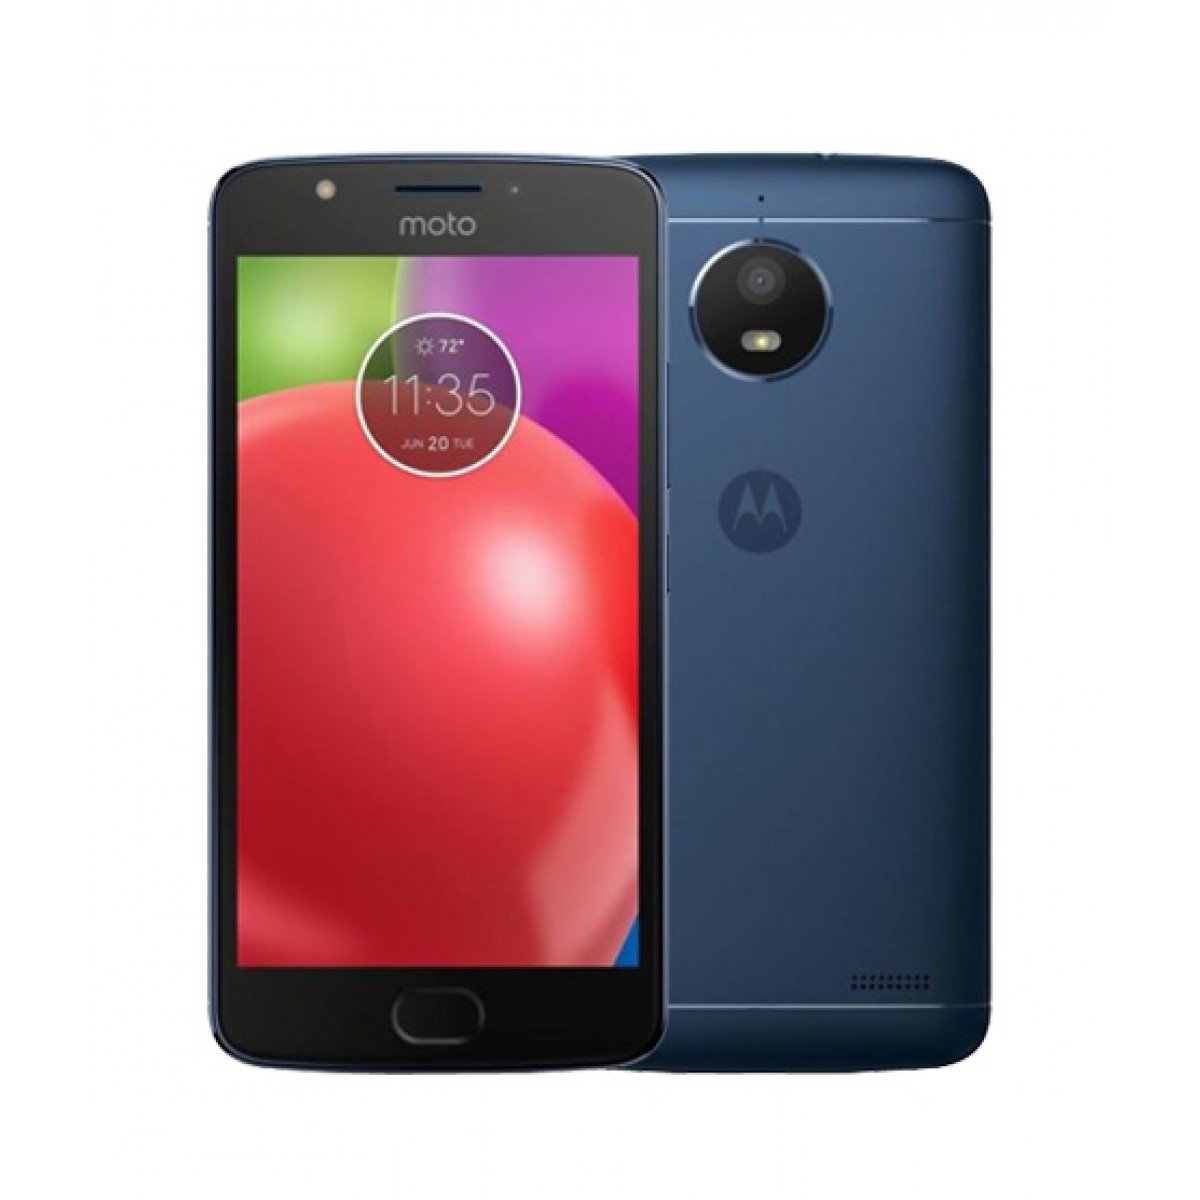 Motorola Moto E4 Smartphone Full Specification And Features